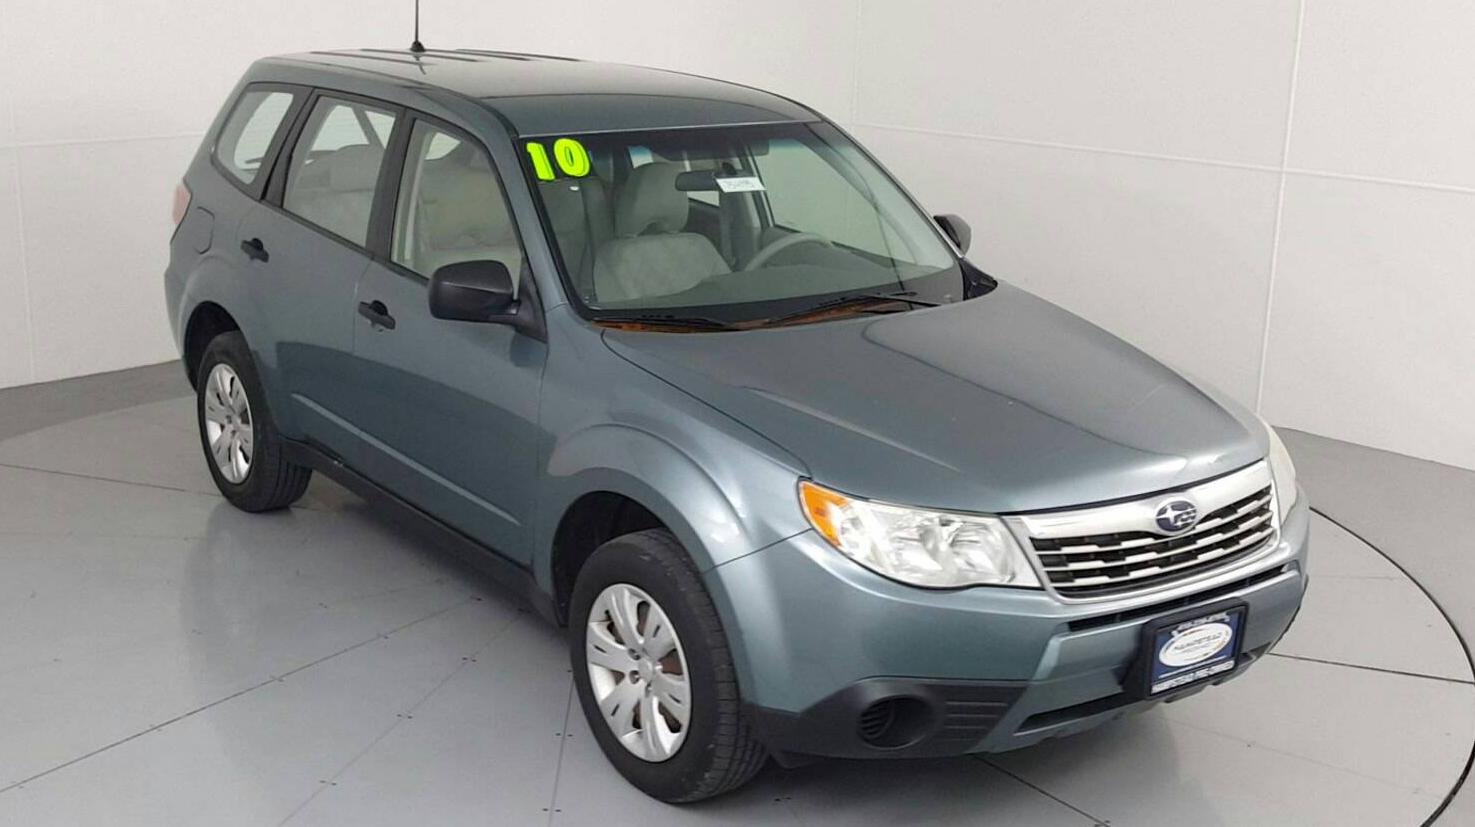 PreOwned 2010 SUBARU FORESTER 2.5X 4WD Sport Utility